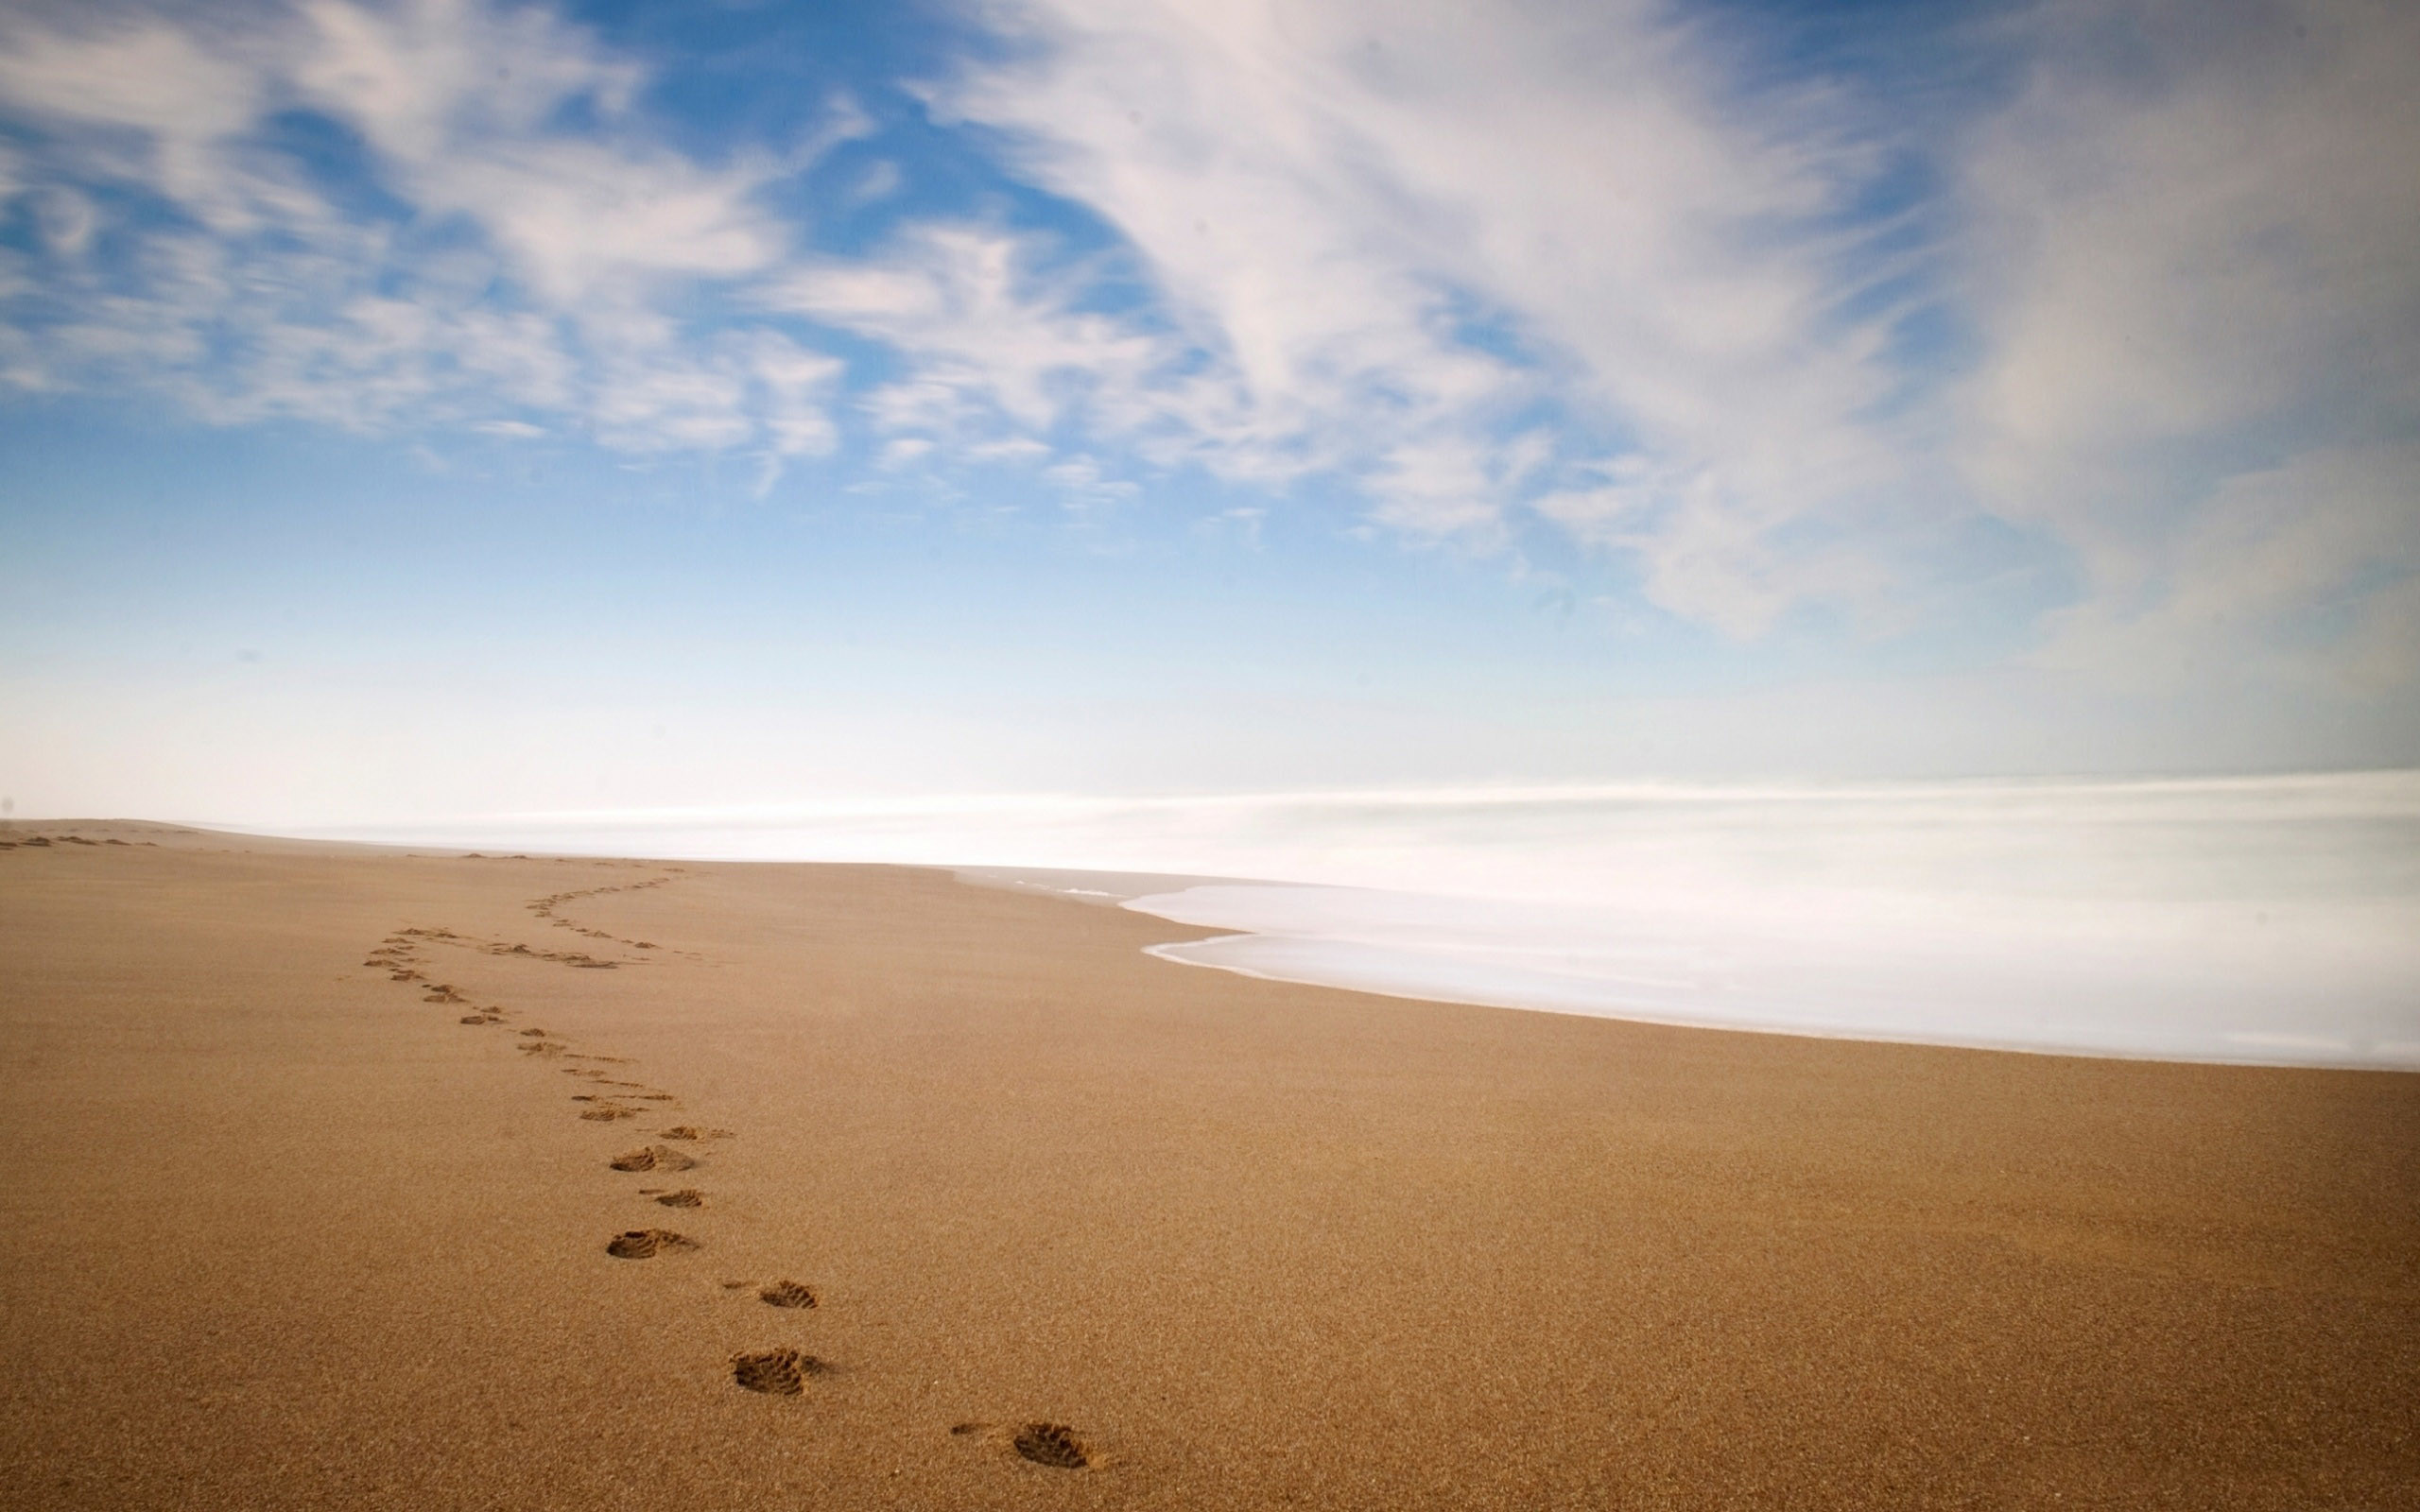 Footprints In The Sand Iphone Panoramic Wallpaper HD Pic